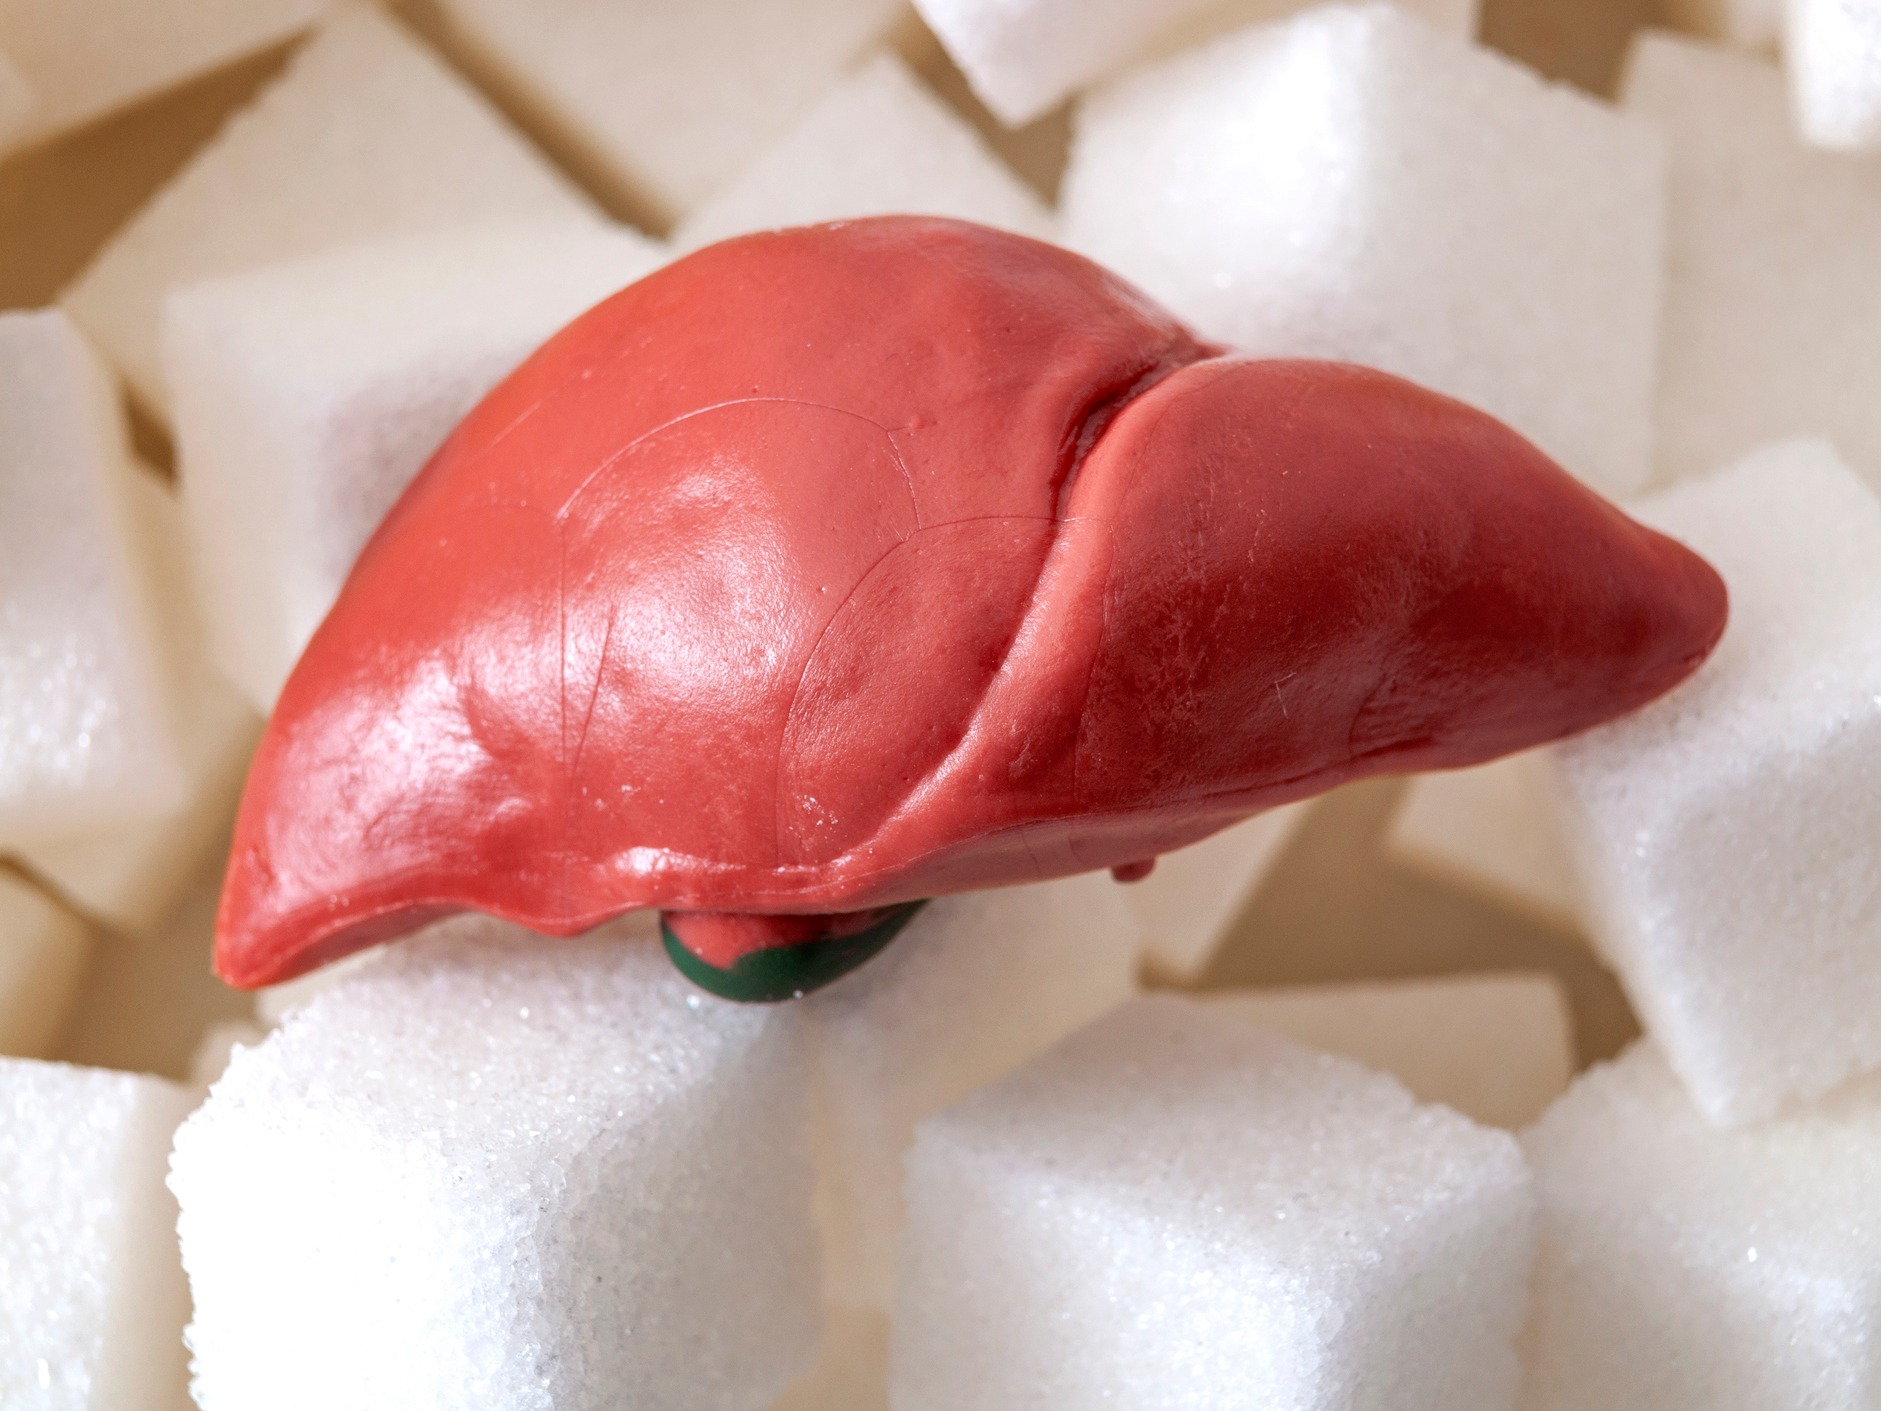 Avoid the sugar that leads to fatty liver disease, cancer and heart disease